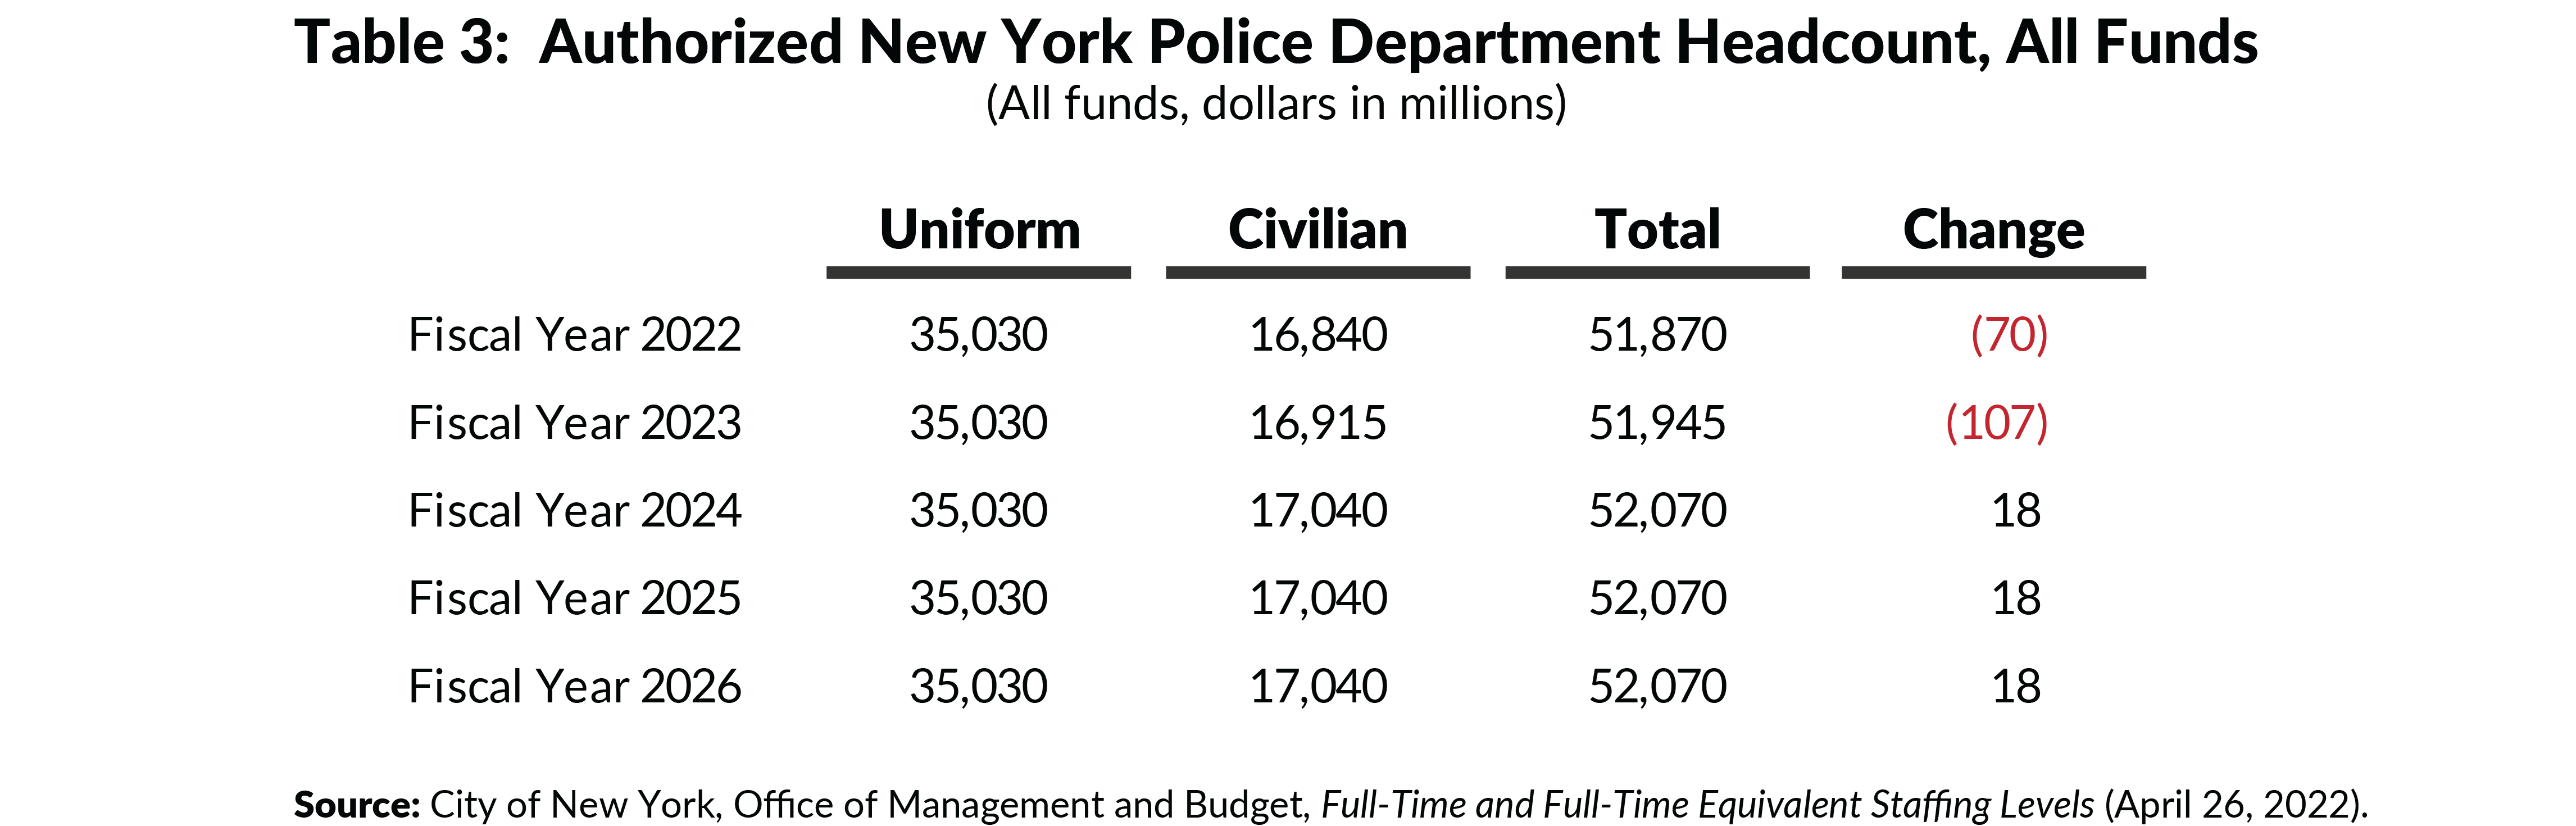 Table 3: Authorized New York Police Department Headcount, All funds